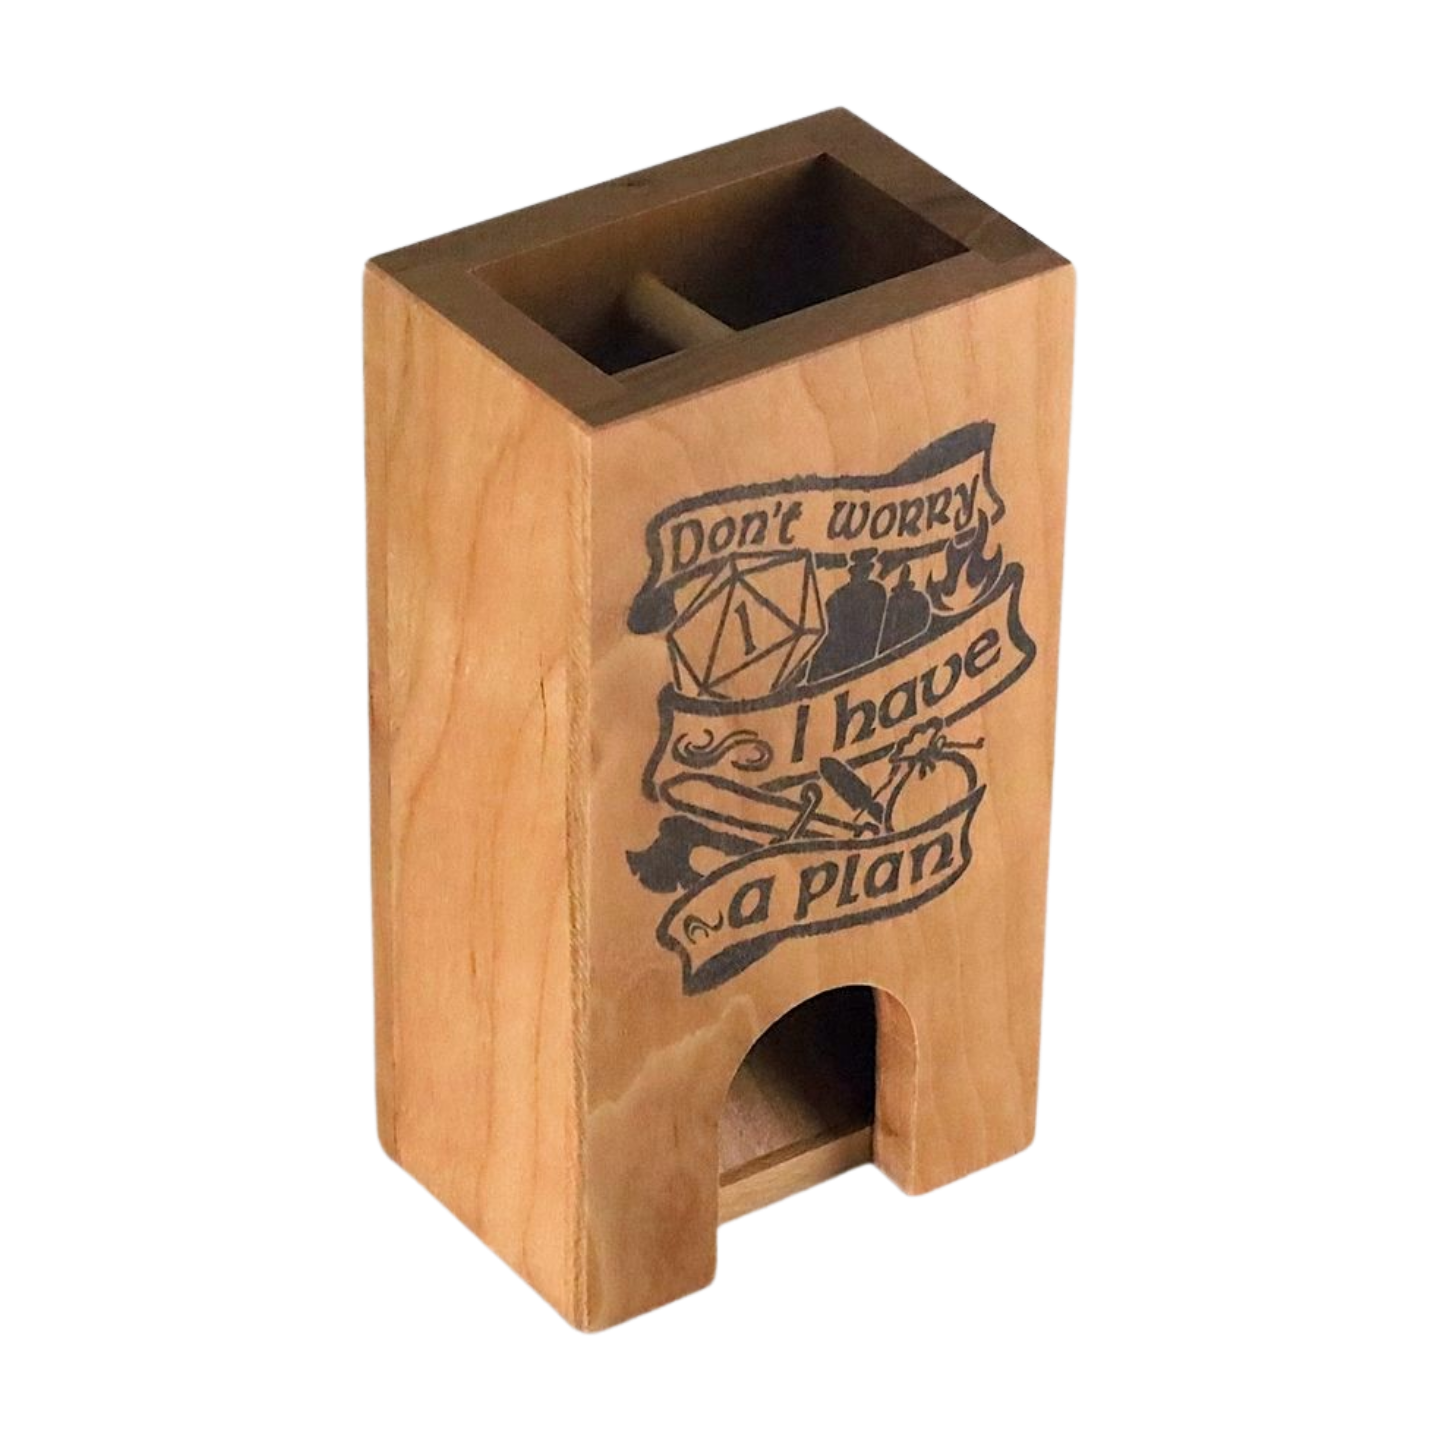 "Don't Worry I have a Plan" DnD Dice Tower Wood for Pathfinder, Shadowrun, TTRPG, D20 Dice Roller Gaming Setup, Dungeon Master Gift for Son - Dragon Armor Games